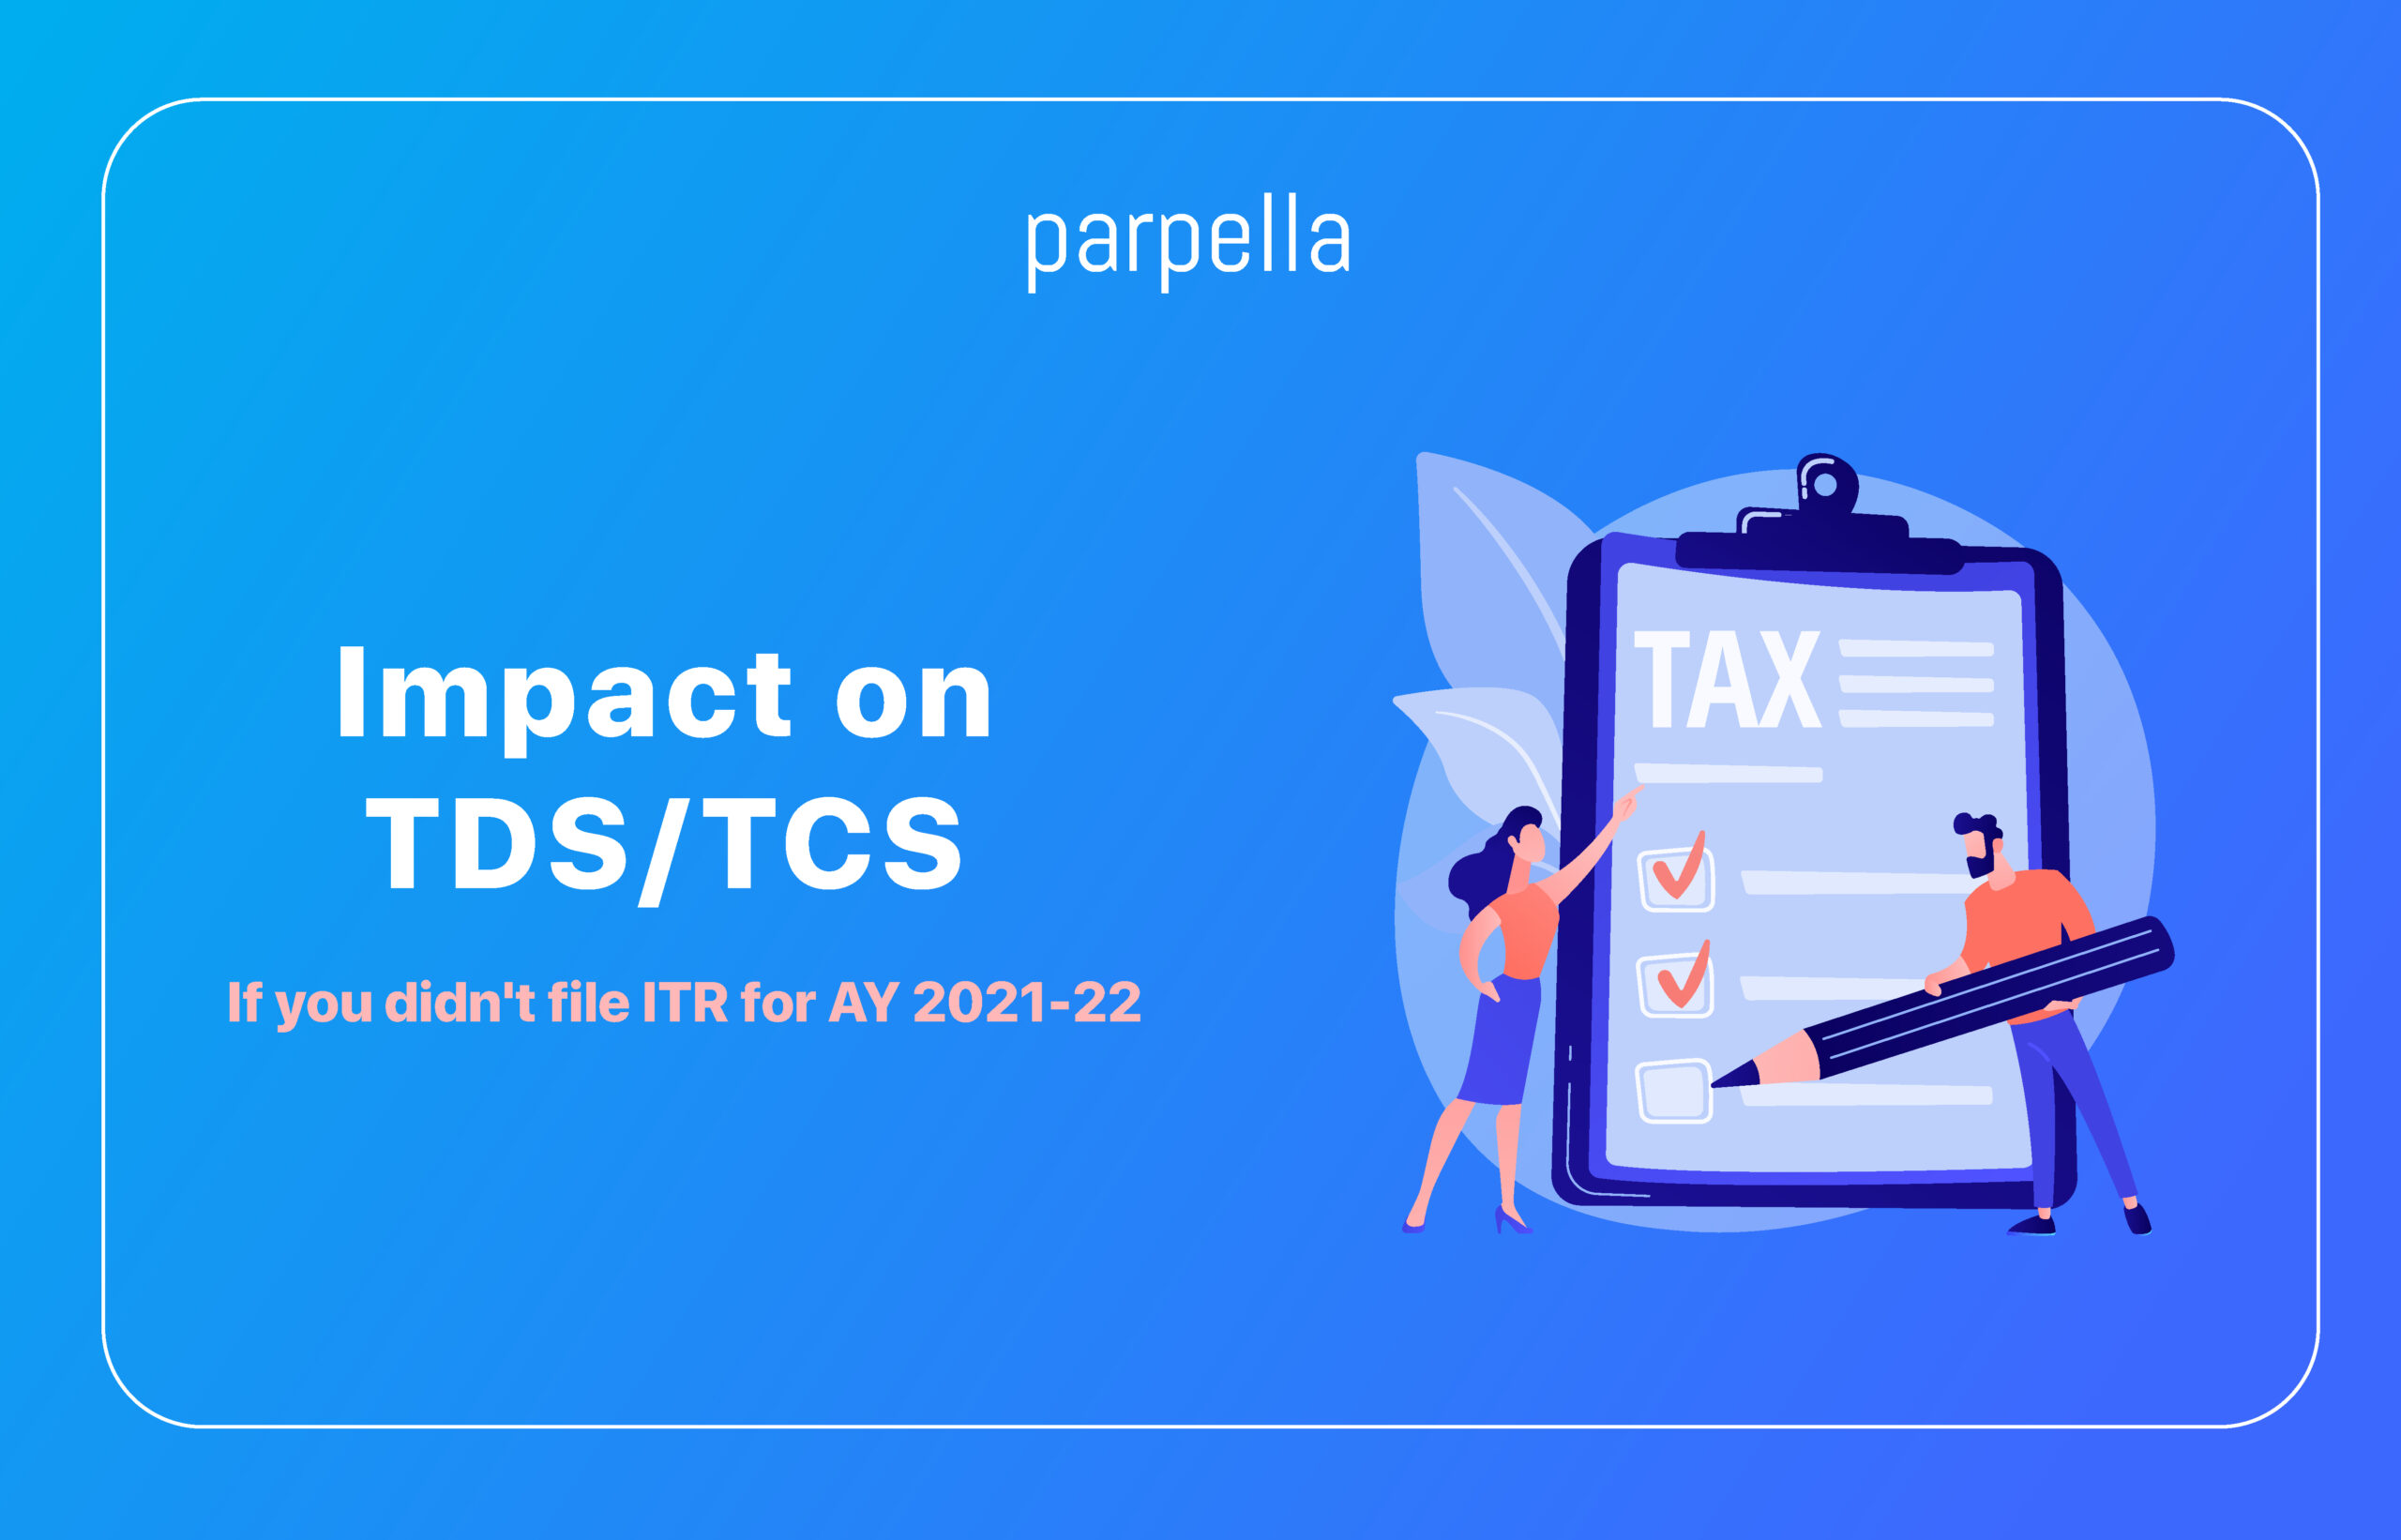 Impact on your TDS/ TCS if you didn’t file ITR for the AY 2021-22